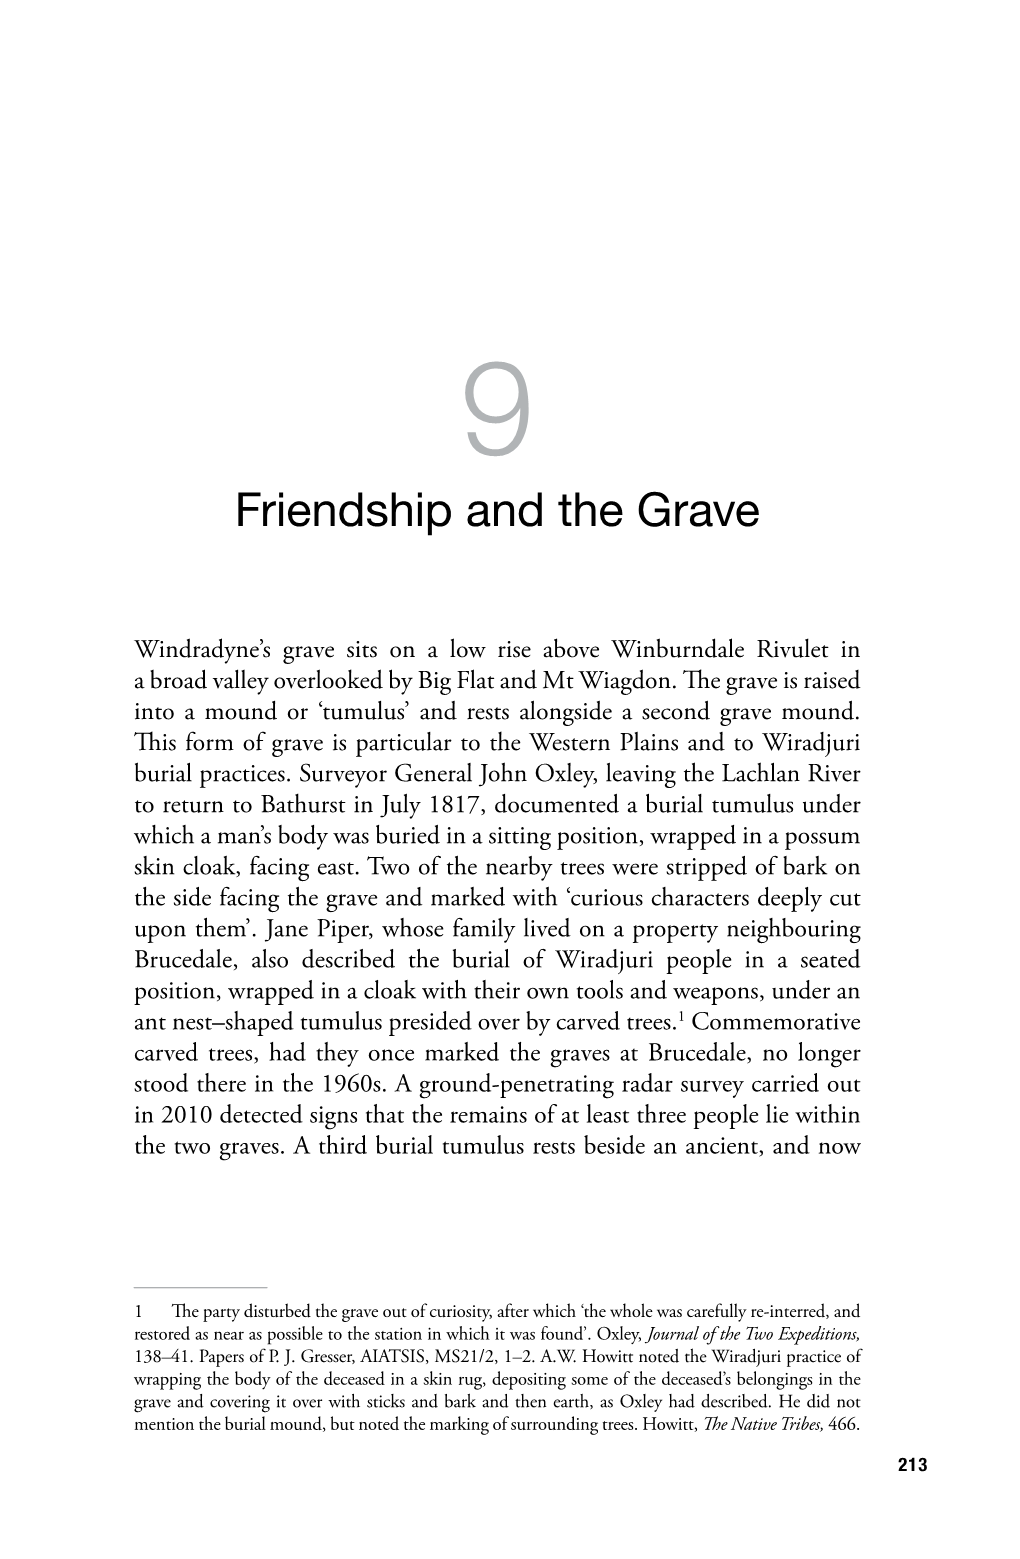 9. Friendship and the Grave